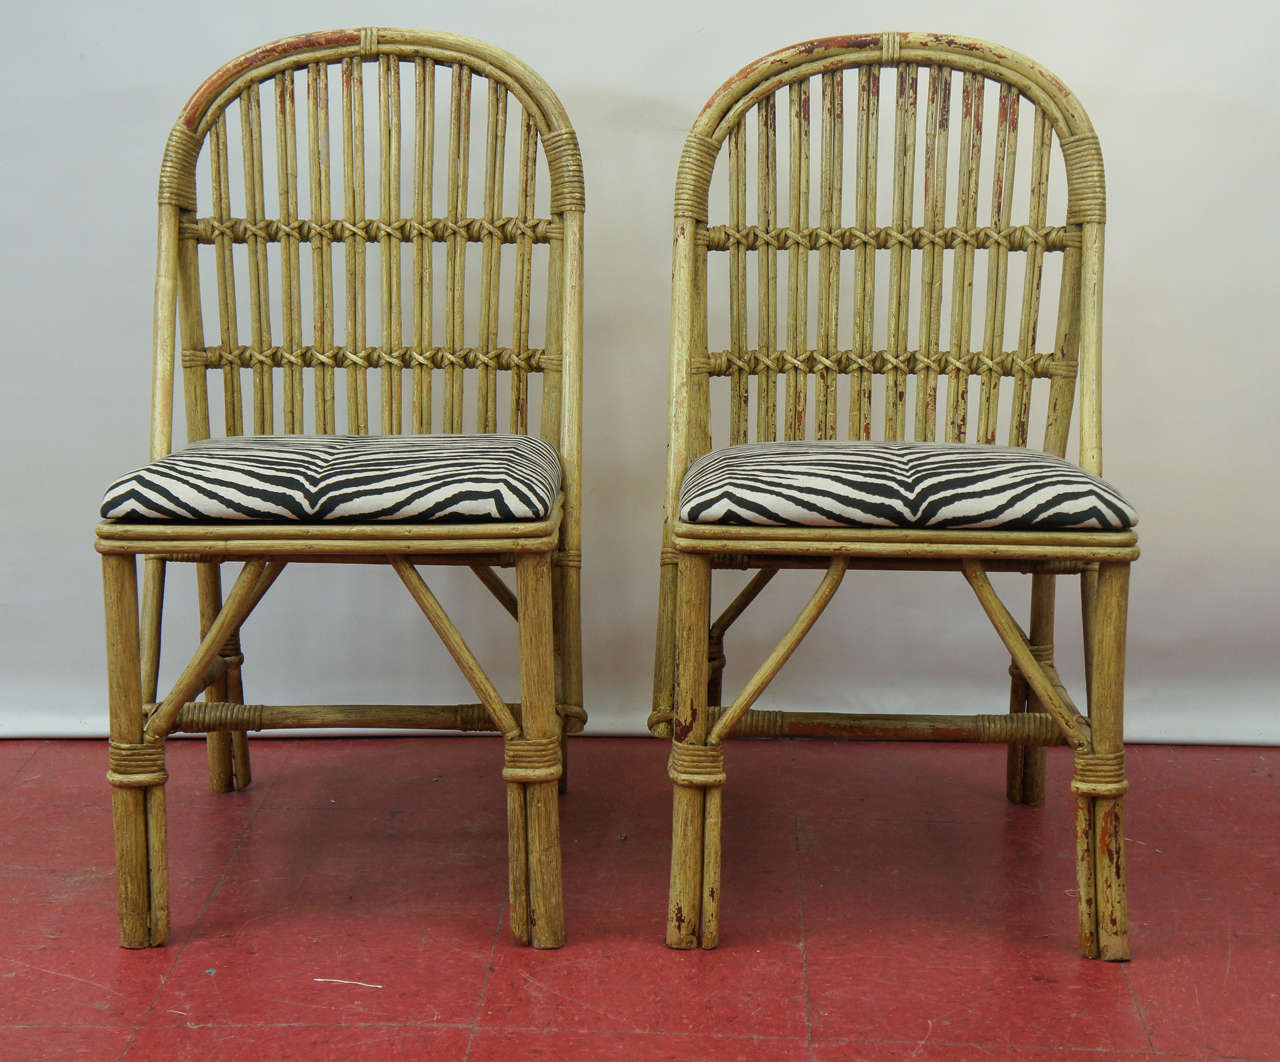 A wonderful stylish pair of painted bamboo side chairs. Seat cushions covered in cotton zebra fabric. Paint has been mostly worn off leaving wonderful patina combining the rustic and elegant feel at the same time.

 